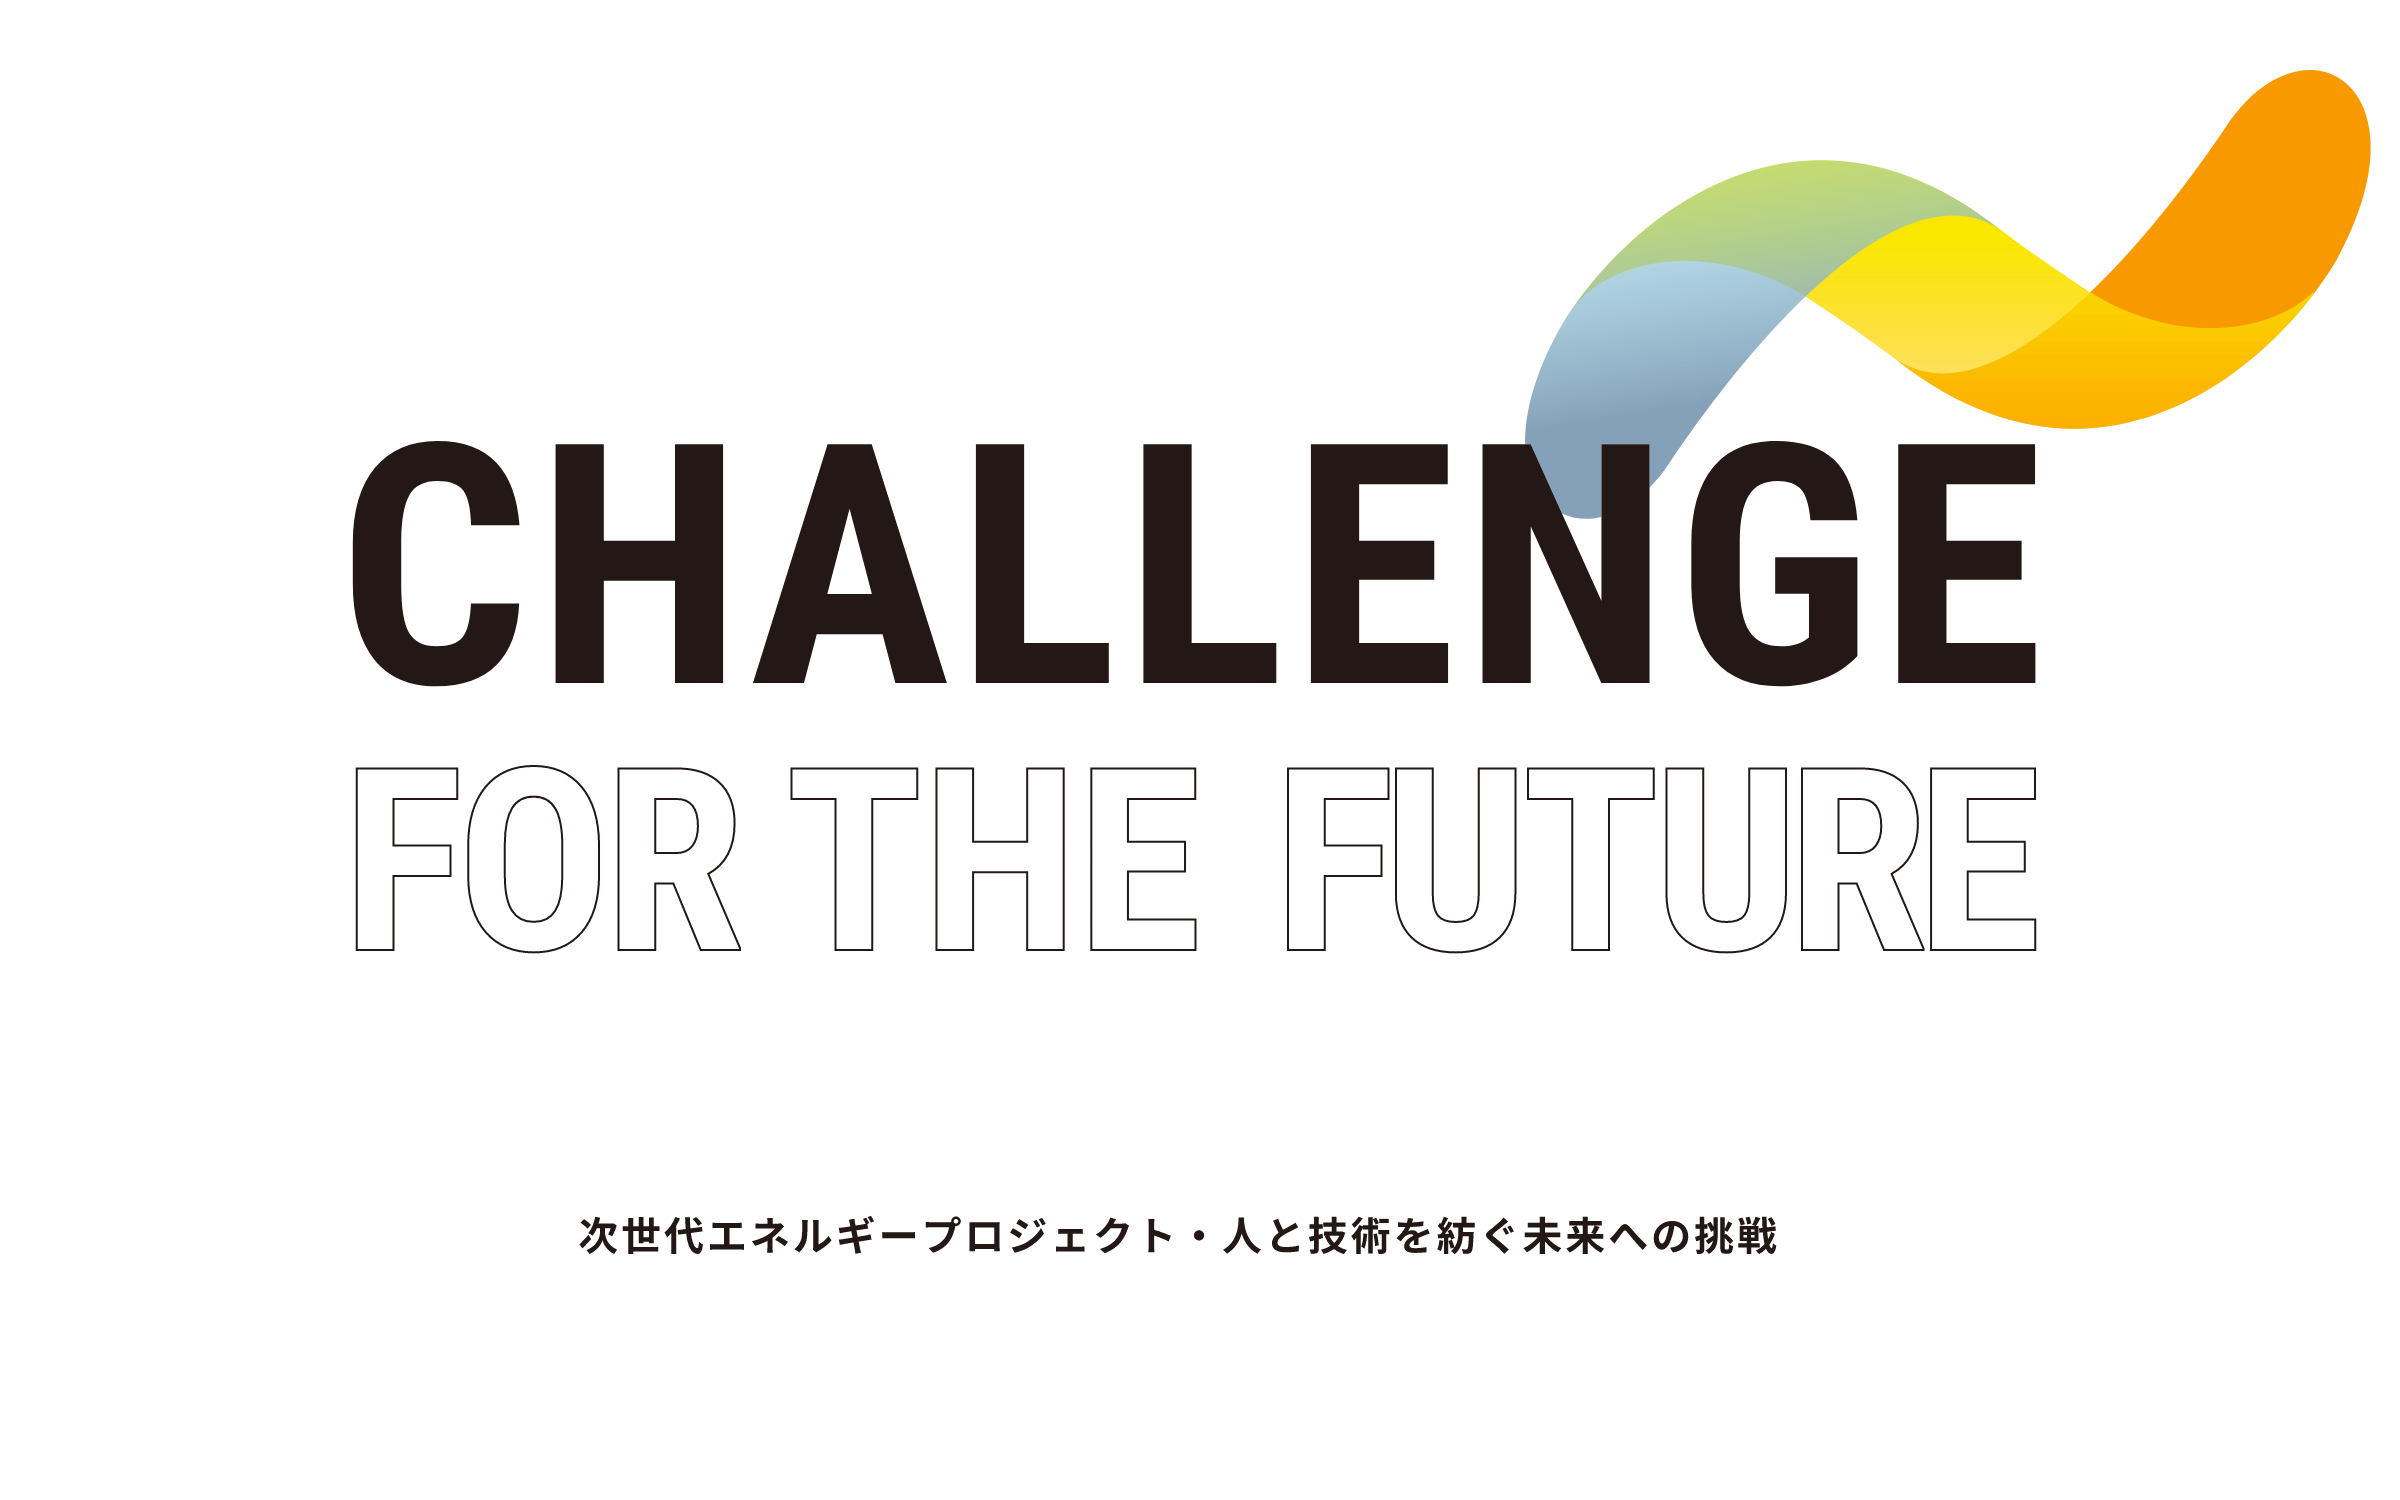 CHALLENGE FOR THE FUTURE